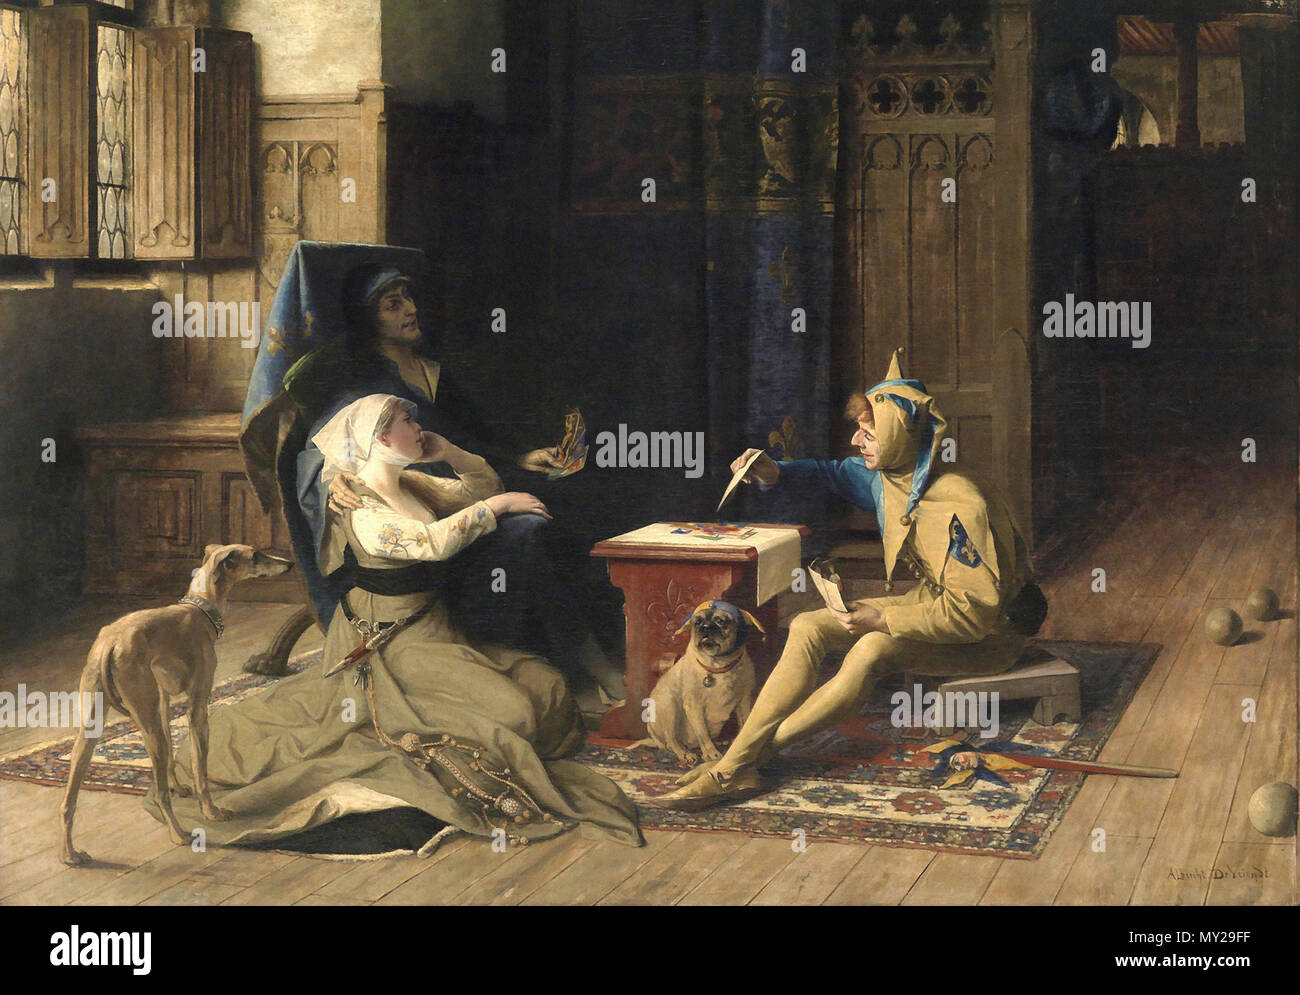 Vriendt Albrecht De - Charles VI the Mad King Playing Cards with His Court Jester 1 Stock Photo